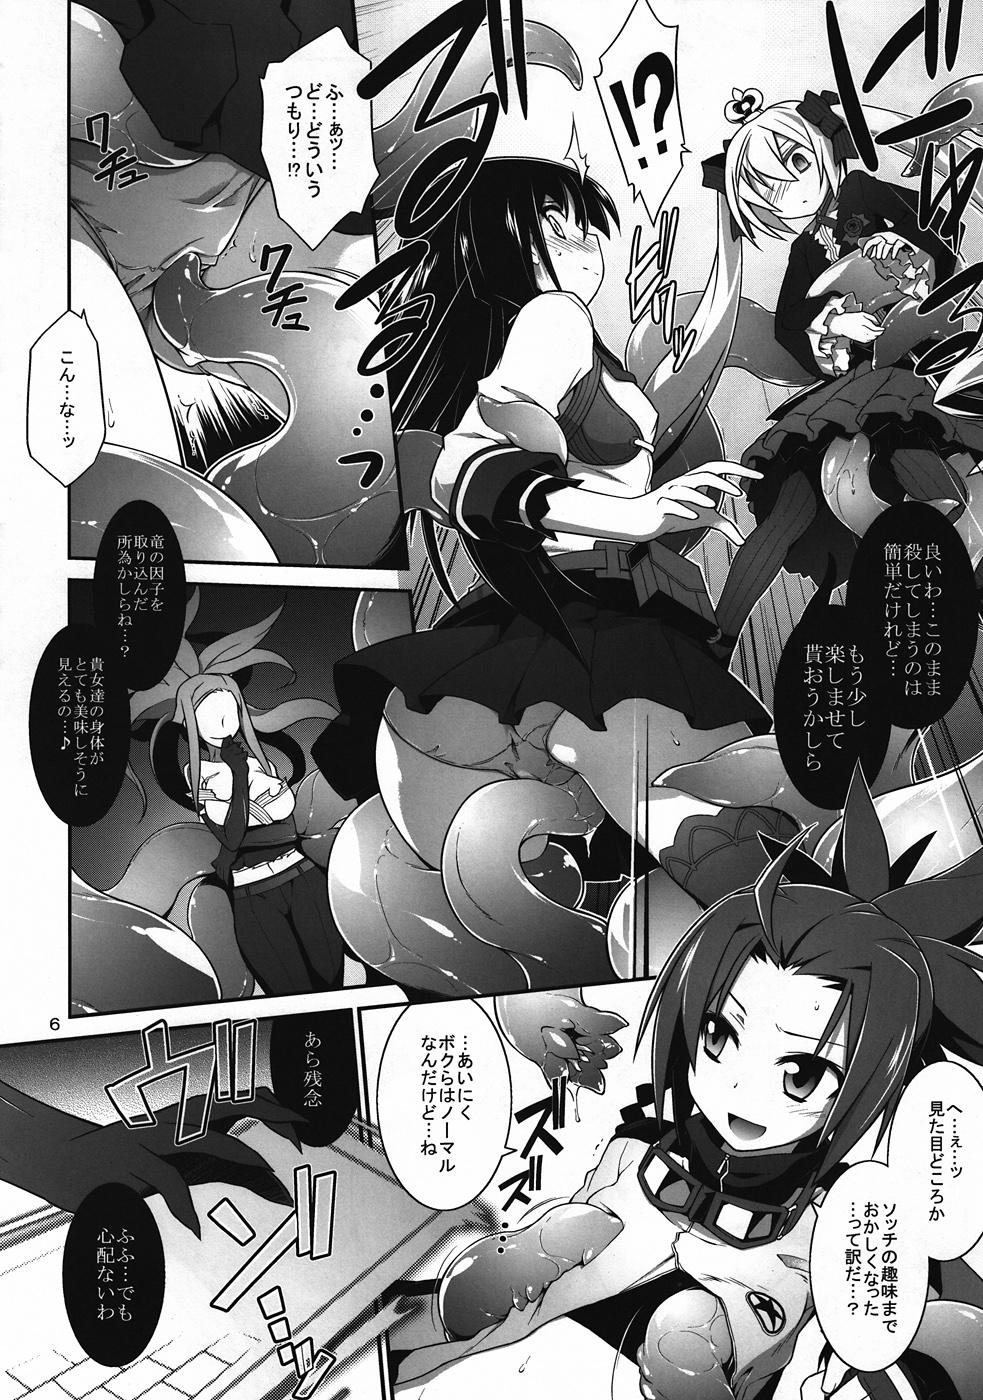 Gagging Kaikan Destroy - 7th dragon Old Vs Young - Page 5